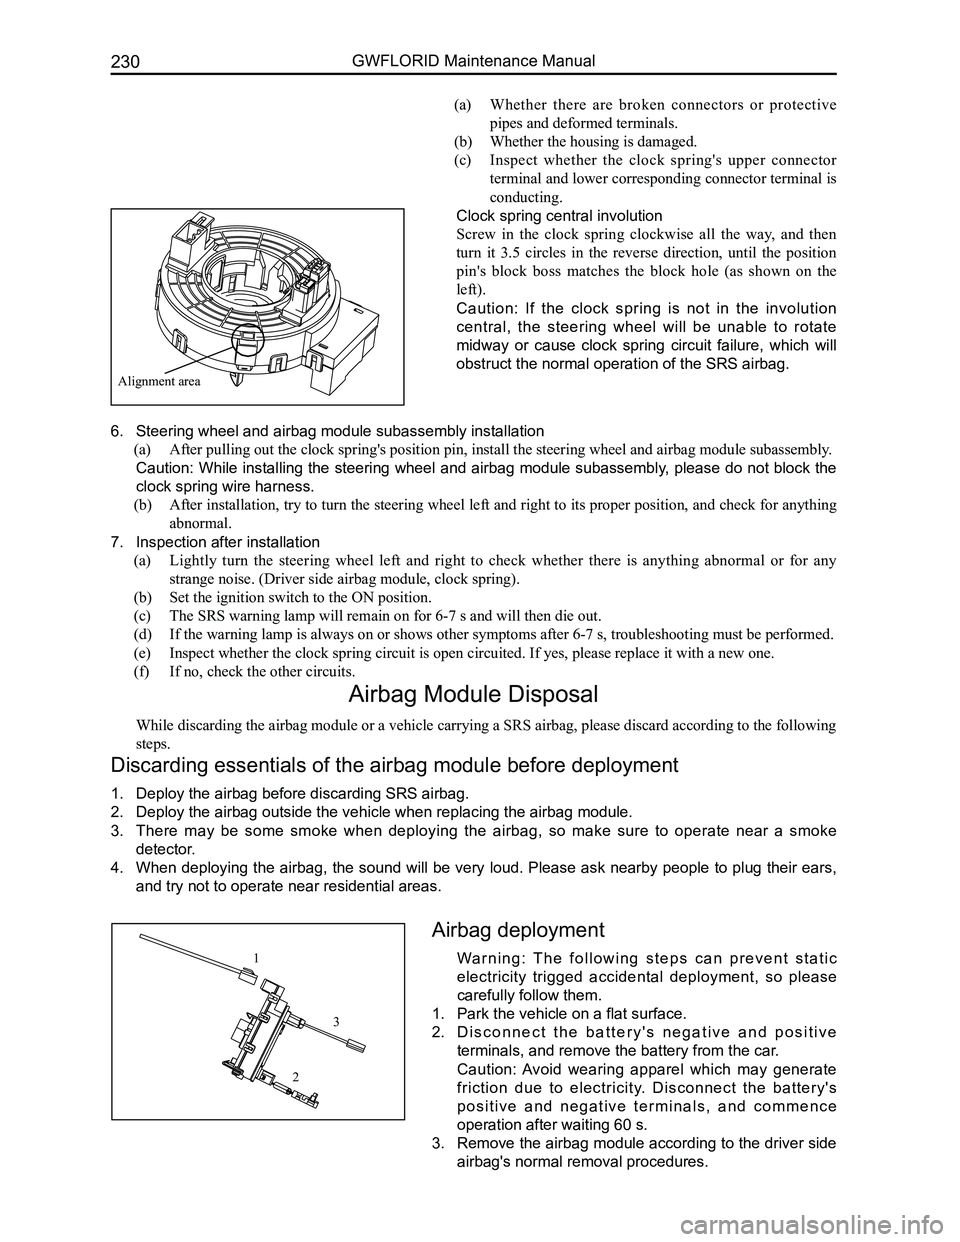 GREAT WALL FLORID 2008  Service Manual Downloaded from www.Manualslib.com manuals search engine GWFLORID Maintenance Manual230
Alignment area
(a) Whether  there  are  broken  connectors  or  protective 
pipes and deformed terminals.
(b) Wh